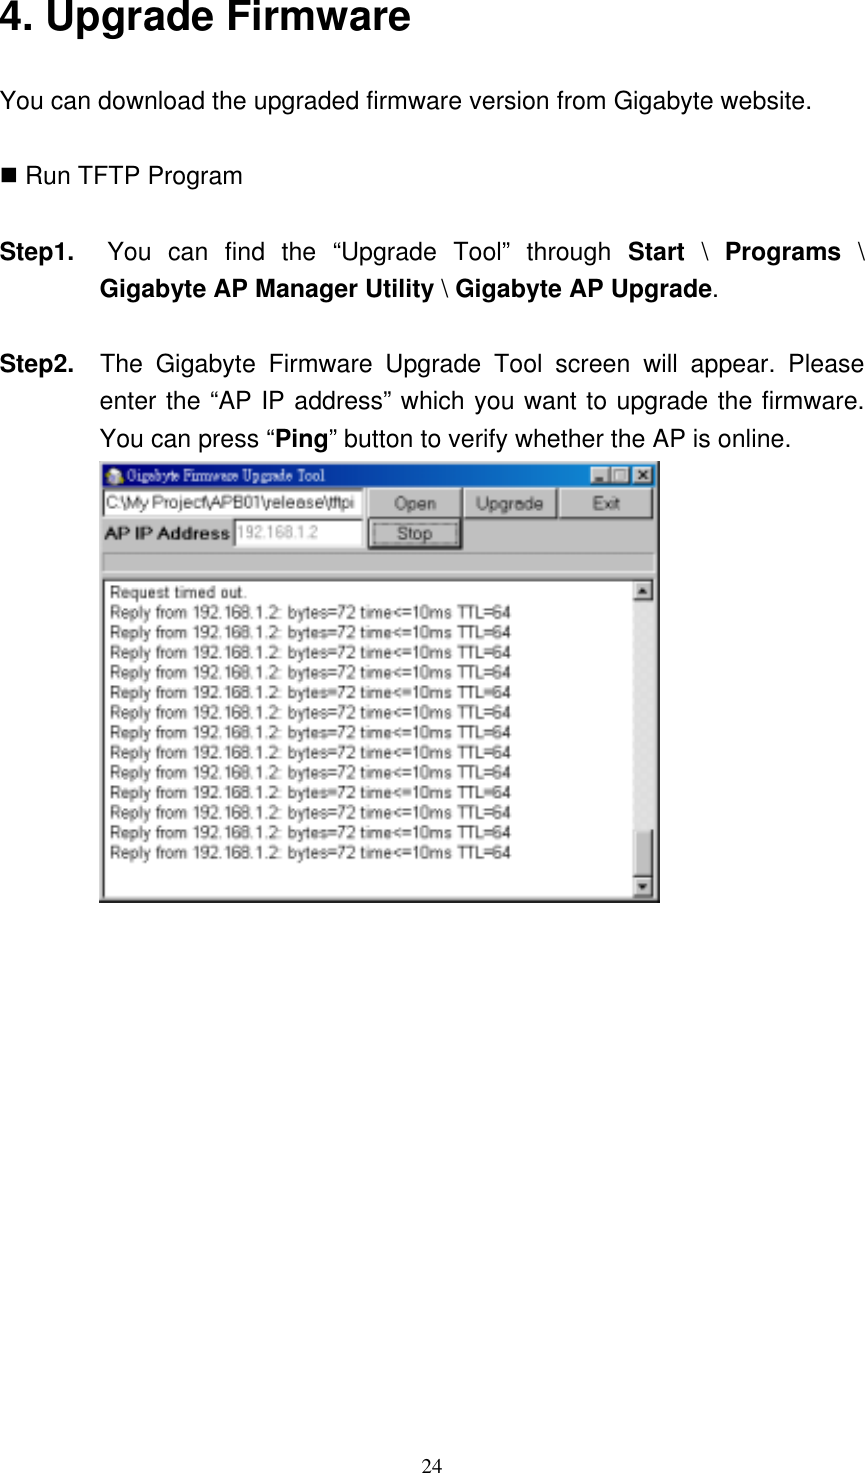 24  4. Upgrade Firmware You can download the upgraded firmware version from Gigabyte website.   Run TFTP Program  Step1.  You can find the “Upgrade Tool” through Start \ Programs \ Gigabyte AP Manager Utility \ Gigabyte AP Upgrade.   Step2.  The Gigabyte Firmware Upgrade Tool screen will appear. Please enter the “AP IP address” which you want to upgrade the firmware. You can press “Ping” button to verify whether the AP is online.  